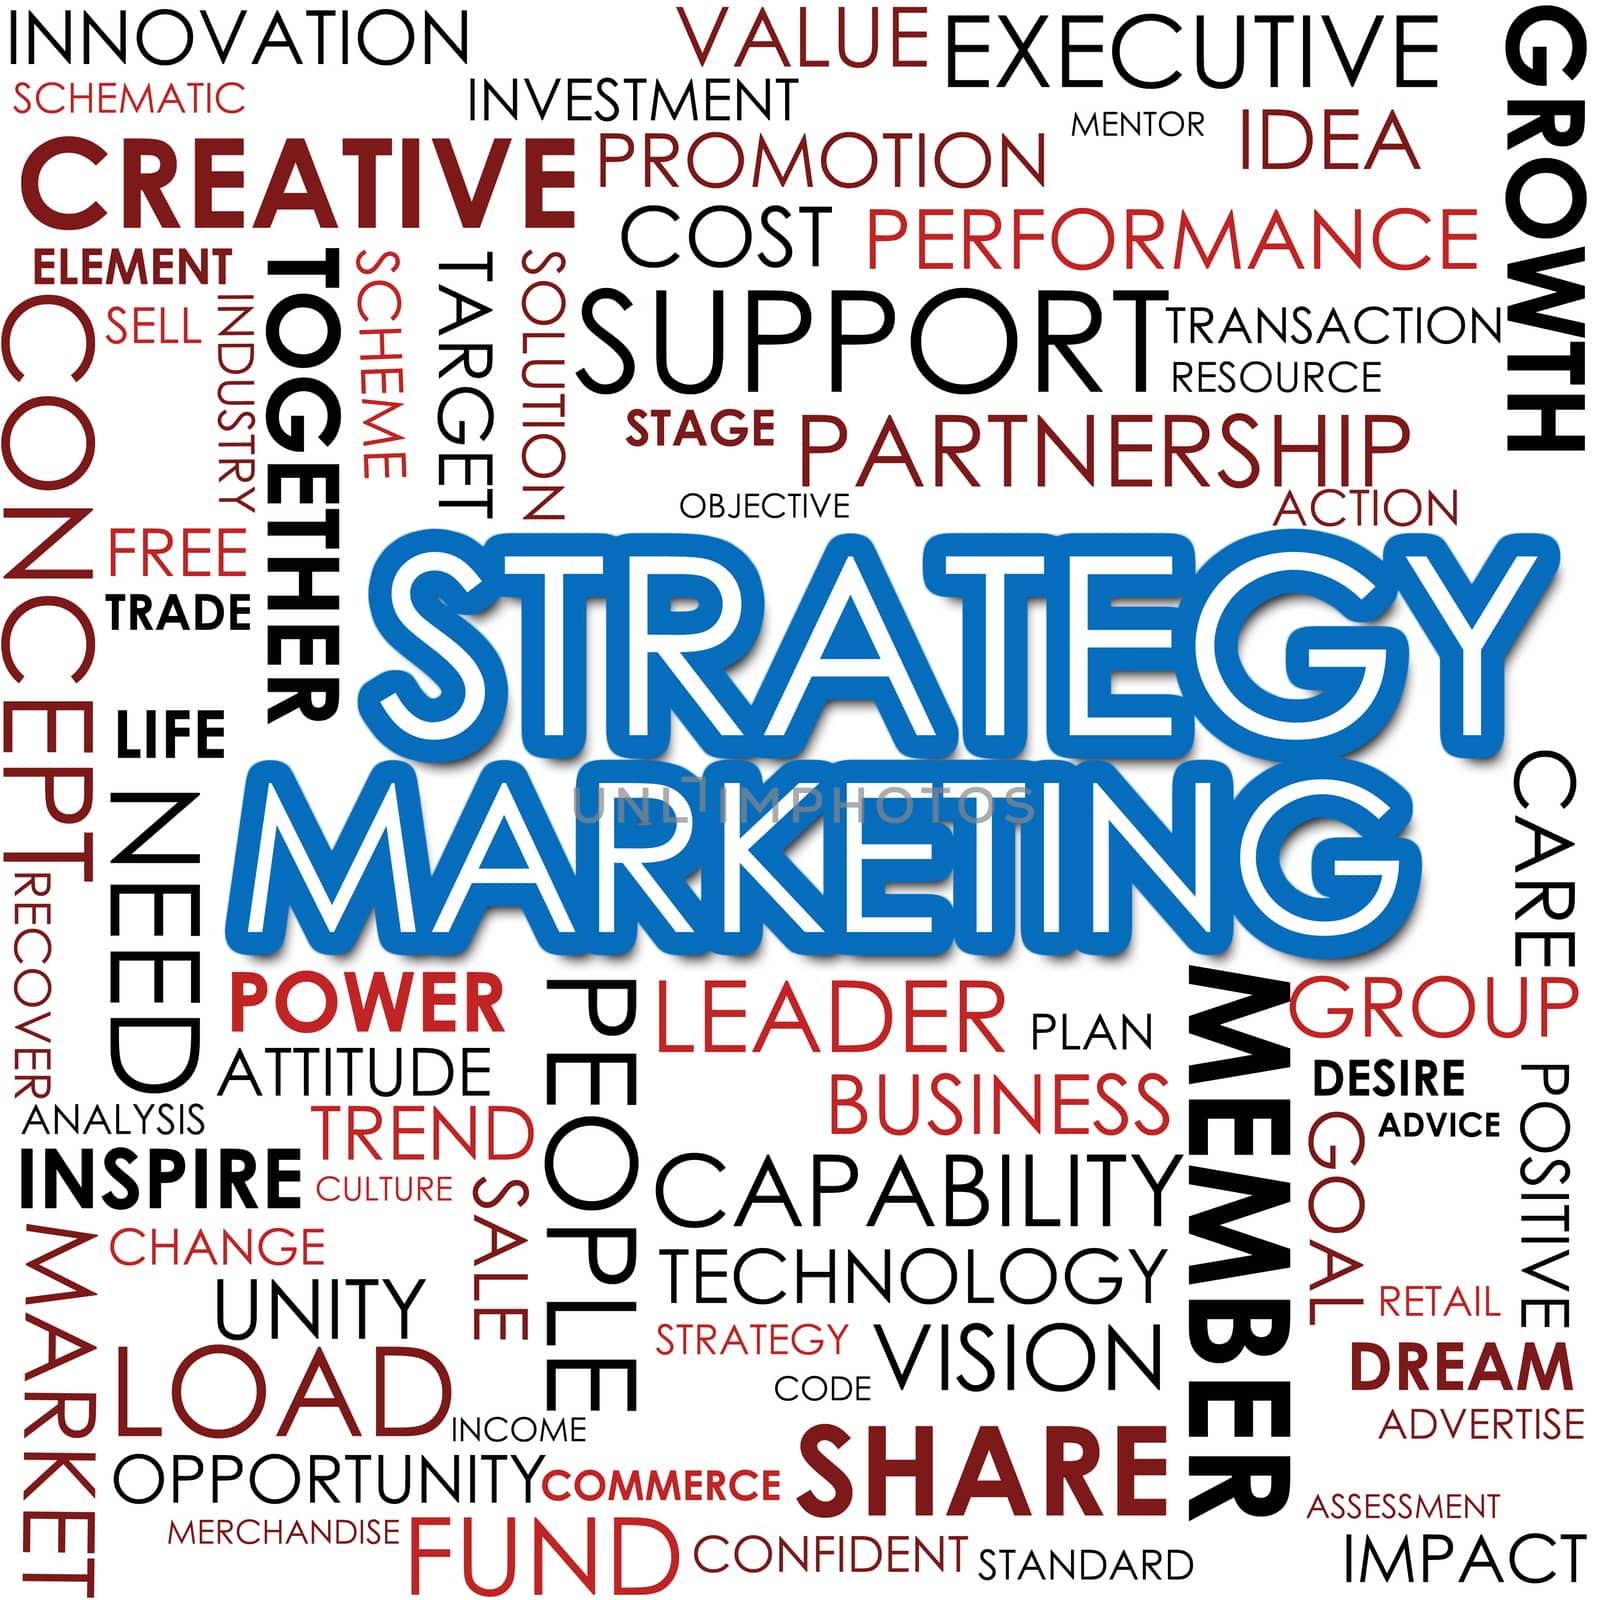 Strategy marketing word cloud image with hi-res rendered artwork that could be used for any graphic design.